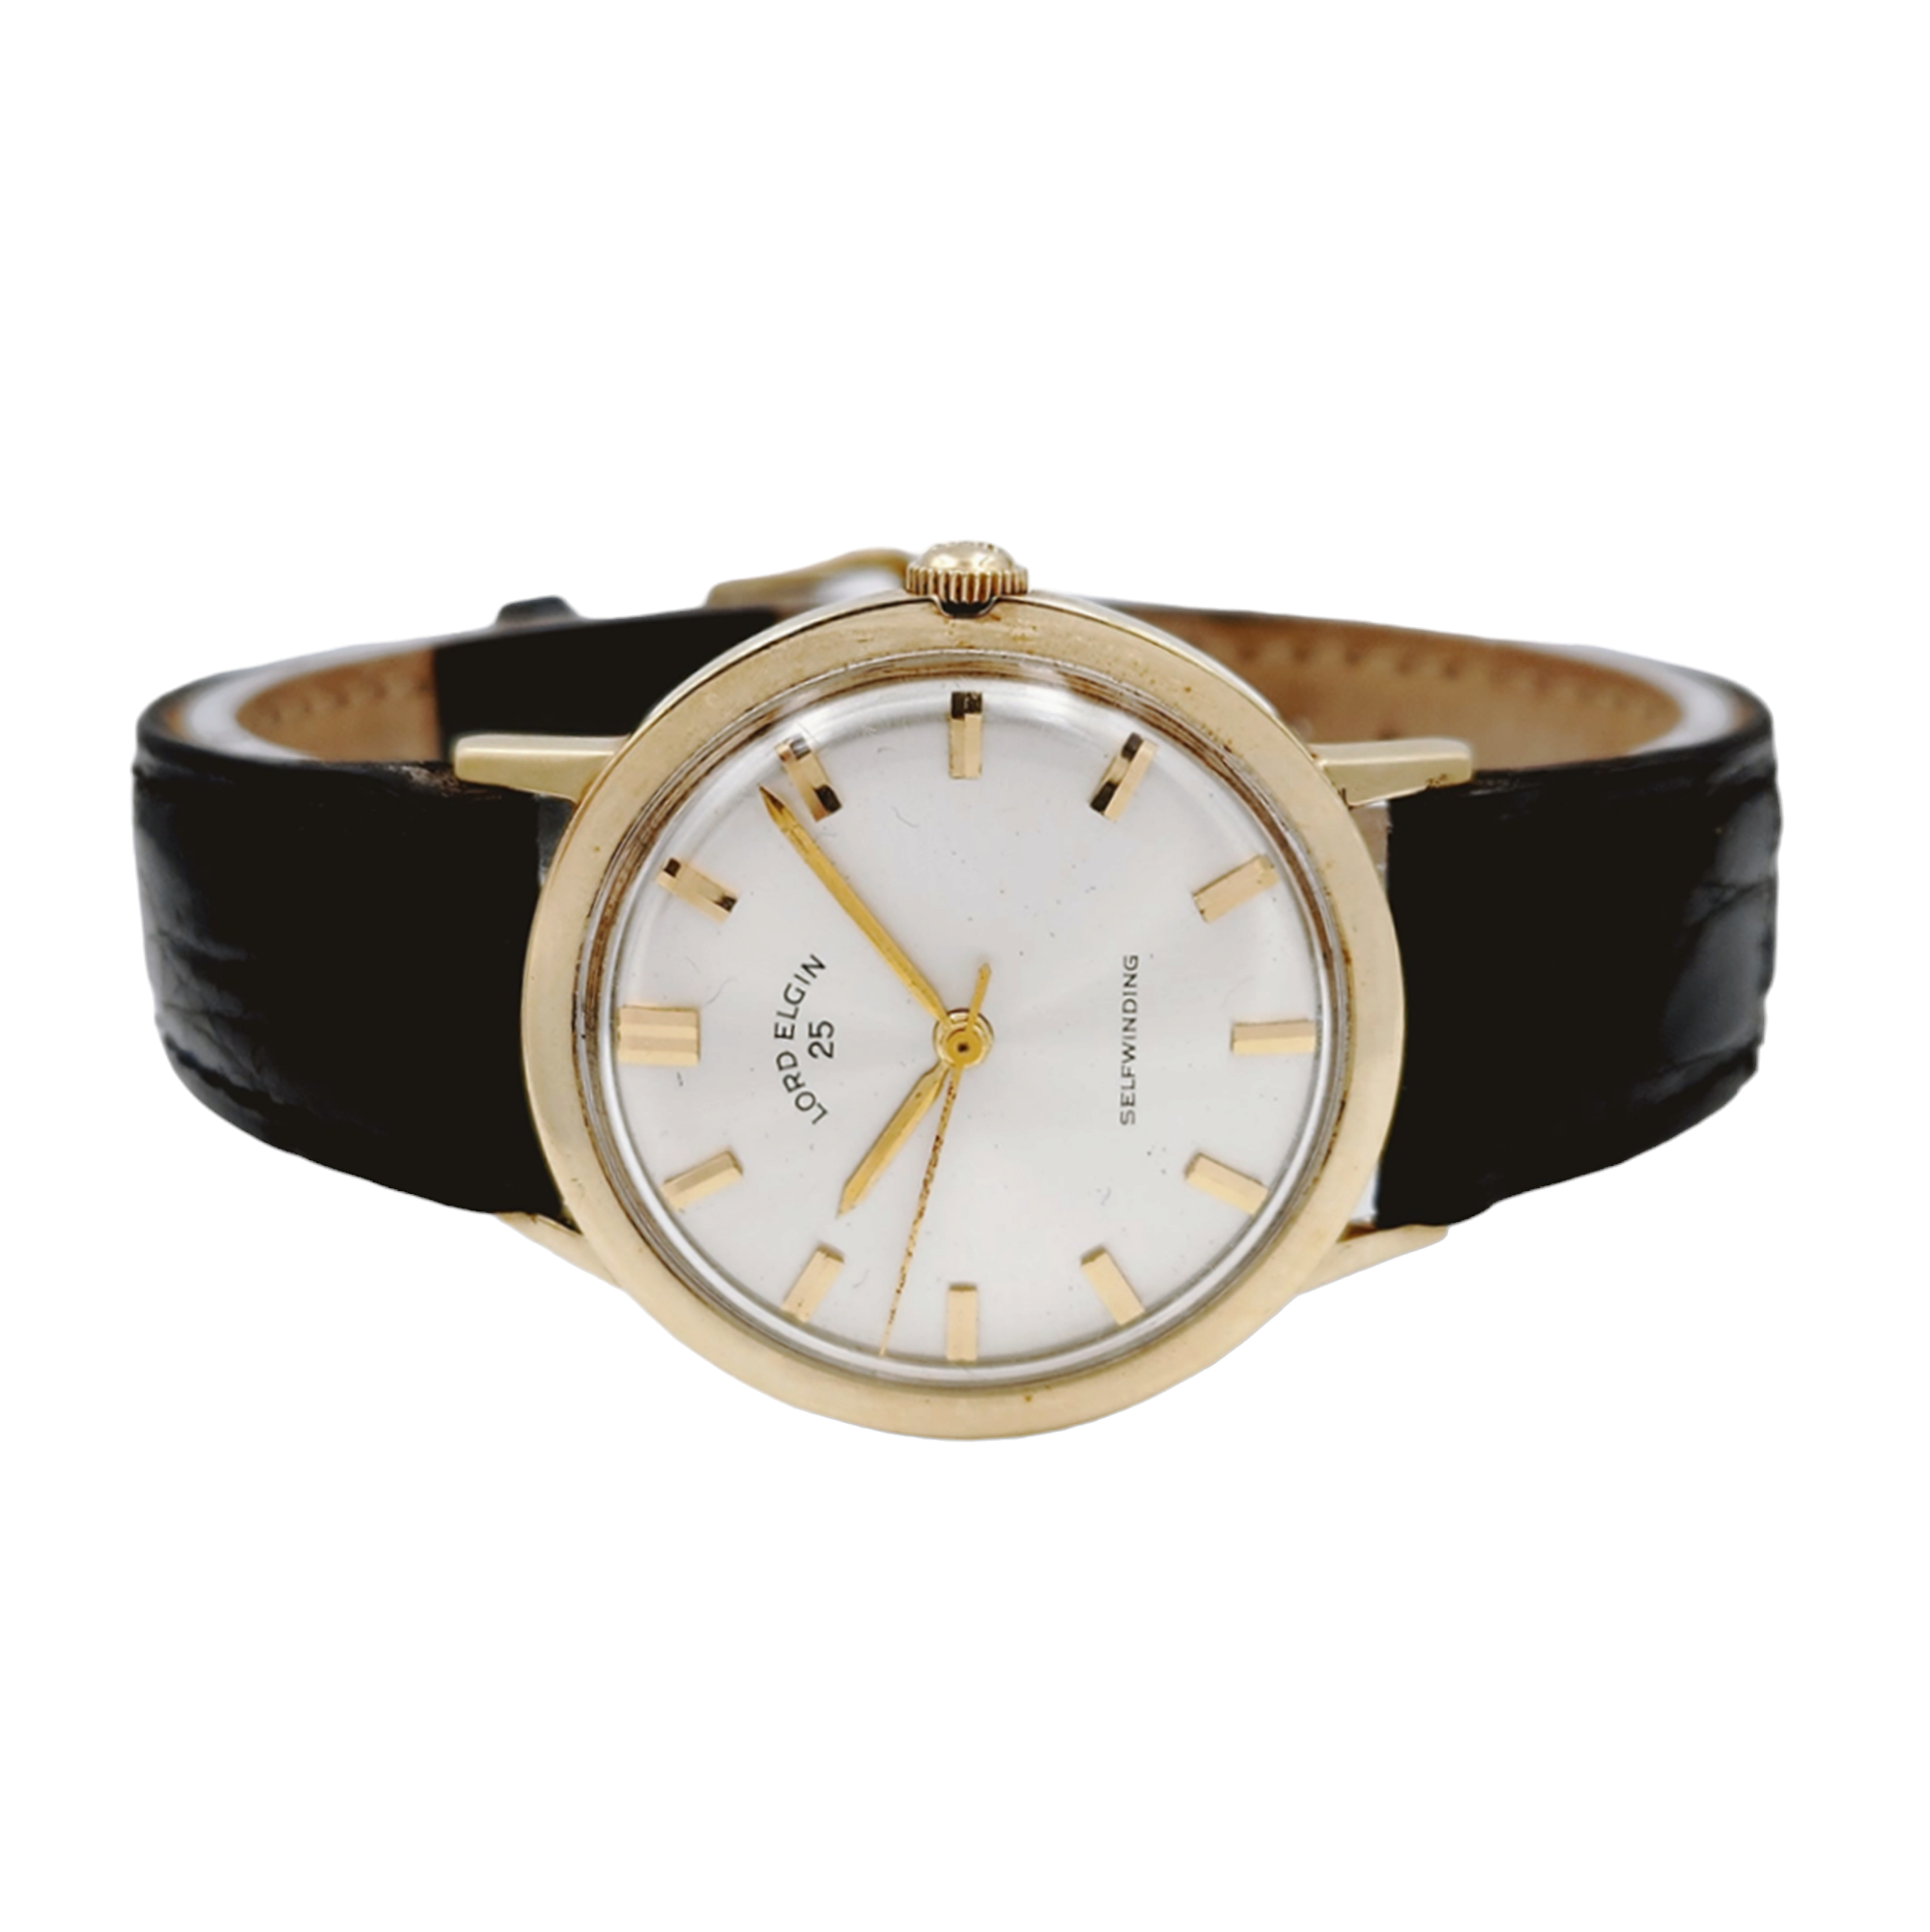 1950's Men's Lord Elgin 25 Vintage 34mm - 14K Yellow Gold Automatic Watch with Black Leather Band and Silver Dial. (Pre-Owned)